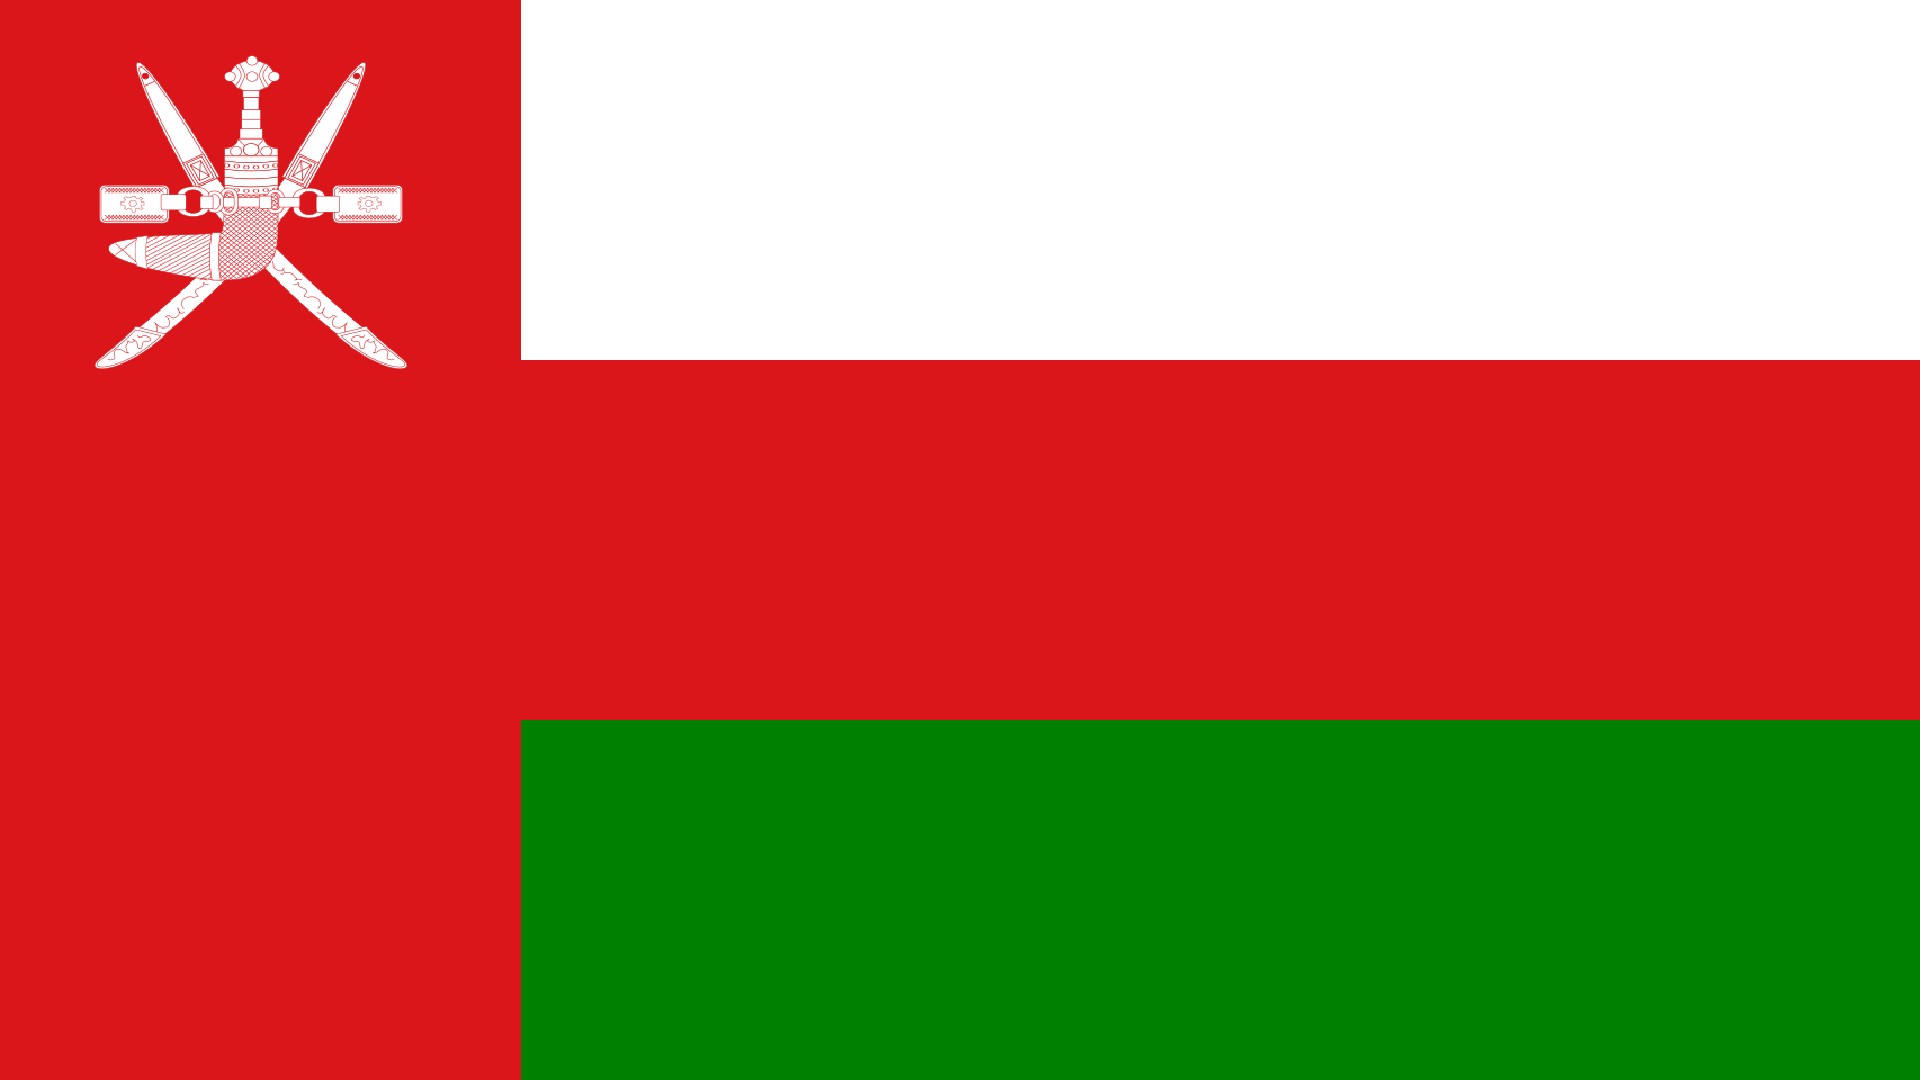 An image of the flag of Oman